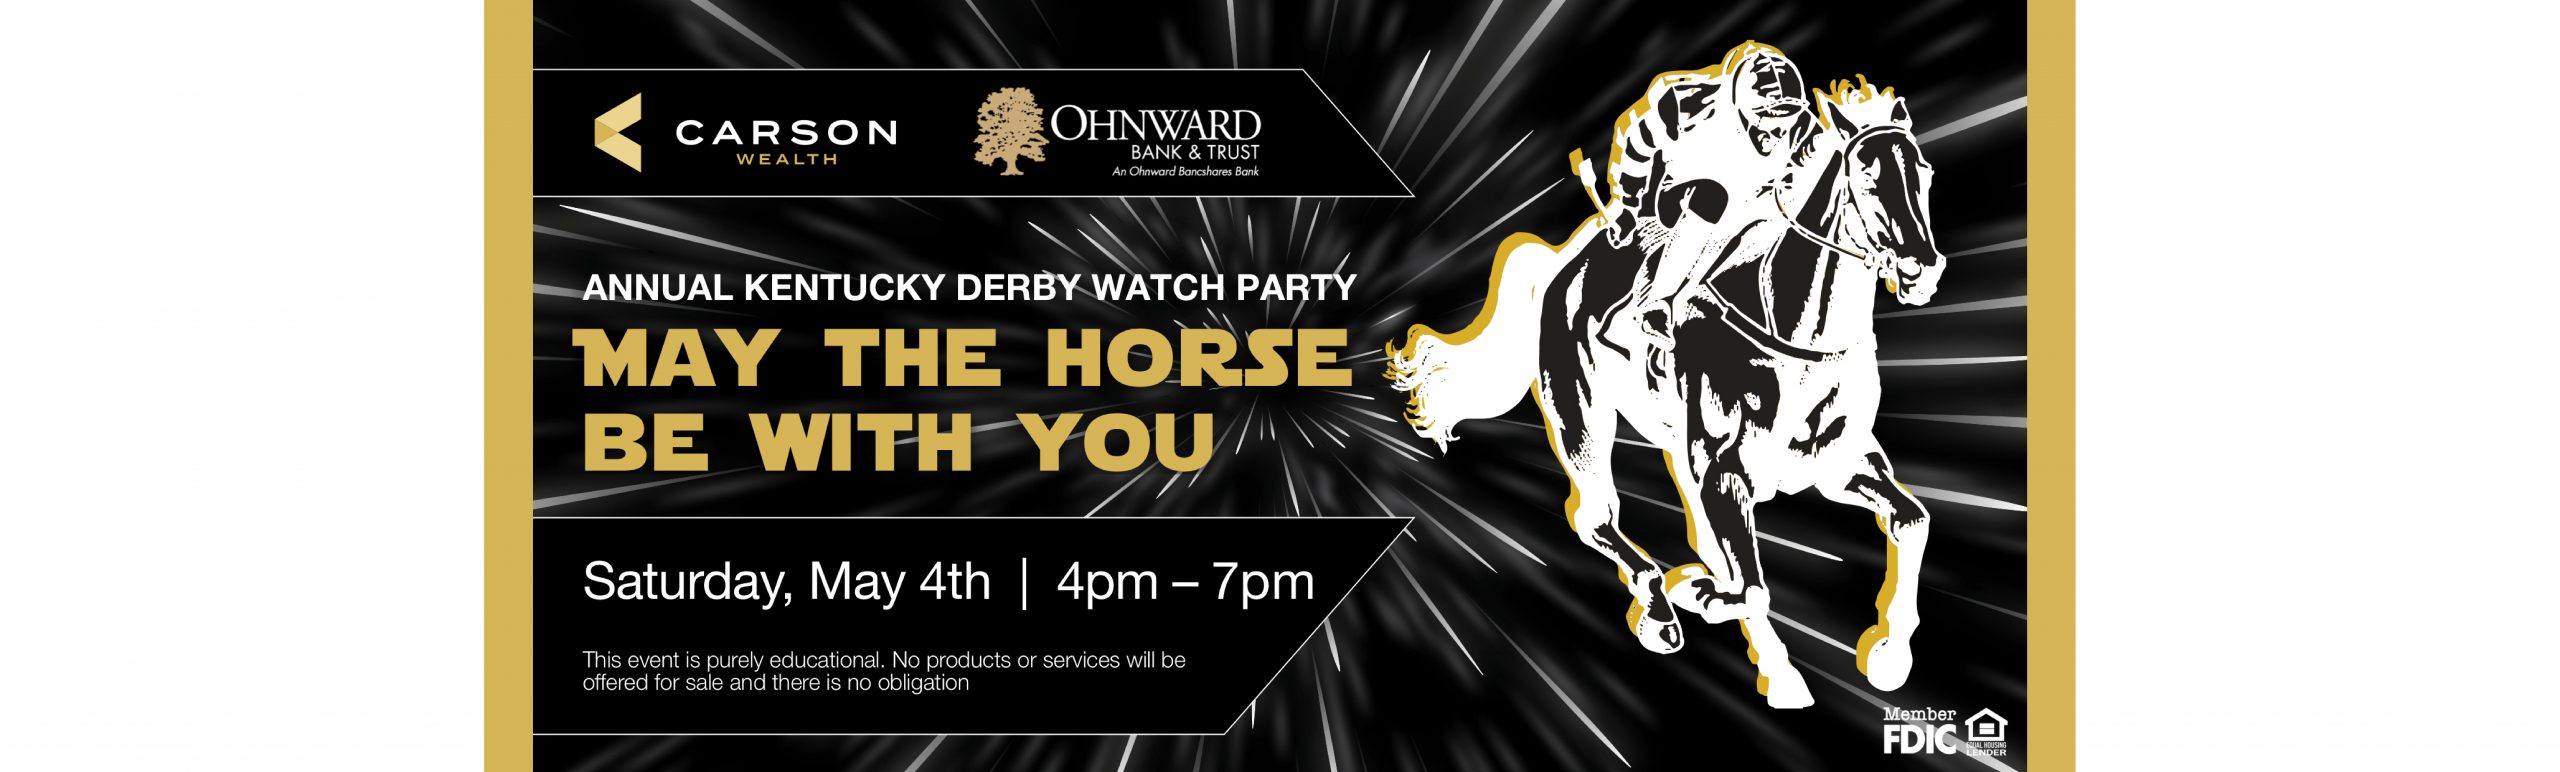 Carson Wealth May 4th Kentucky Derby Watch Party